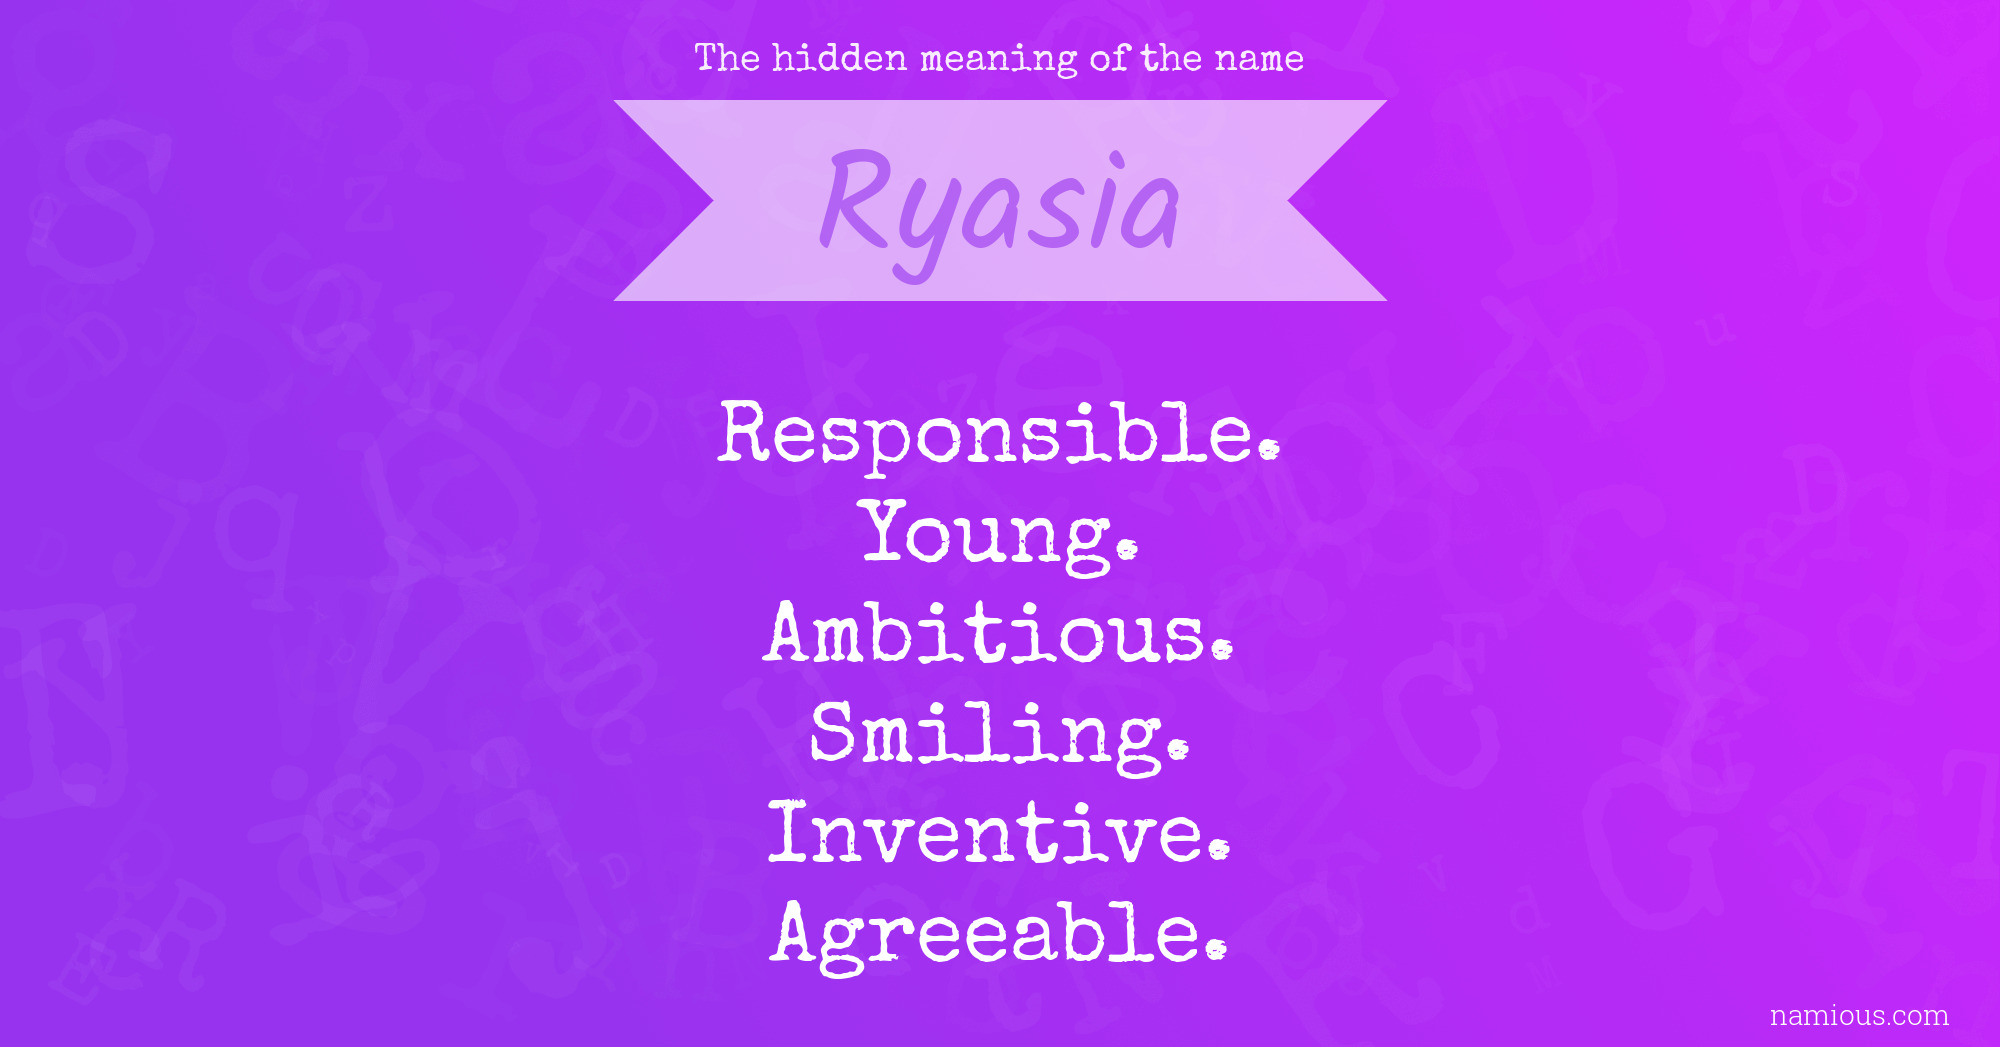 The hidden meaning of the name Ryasia